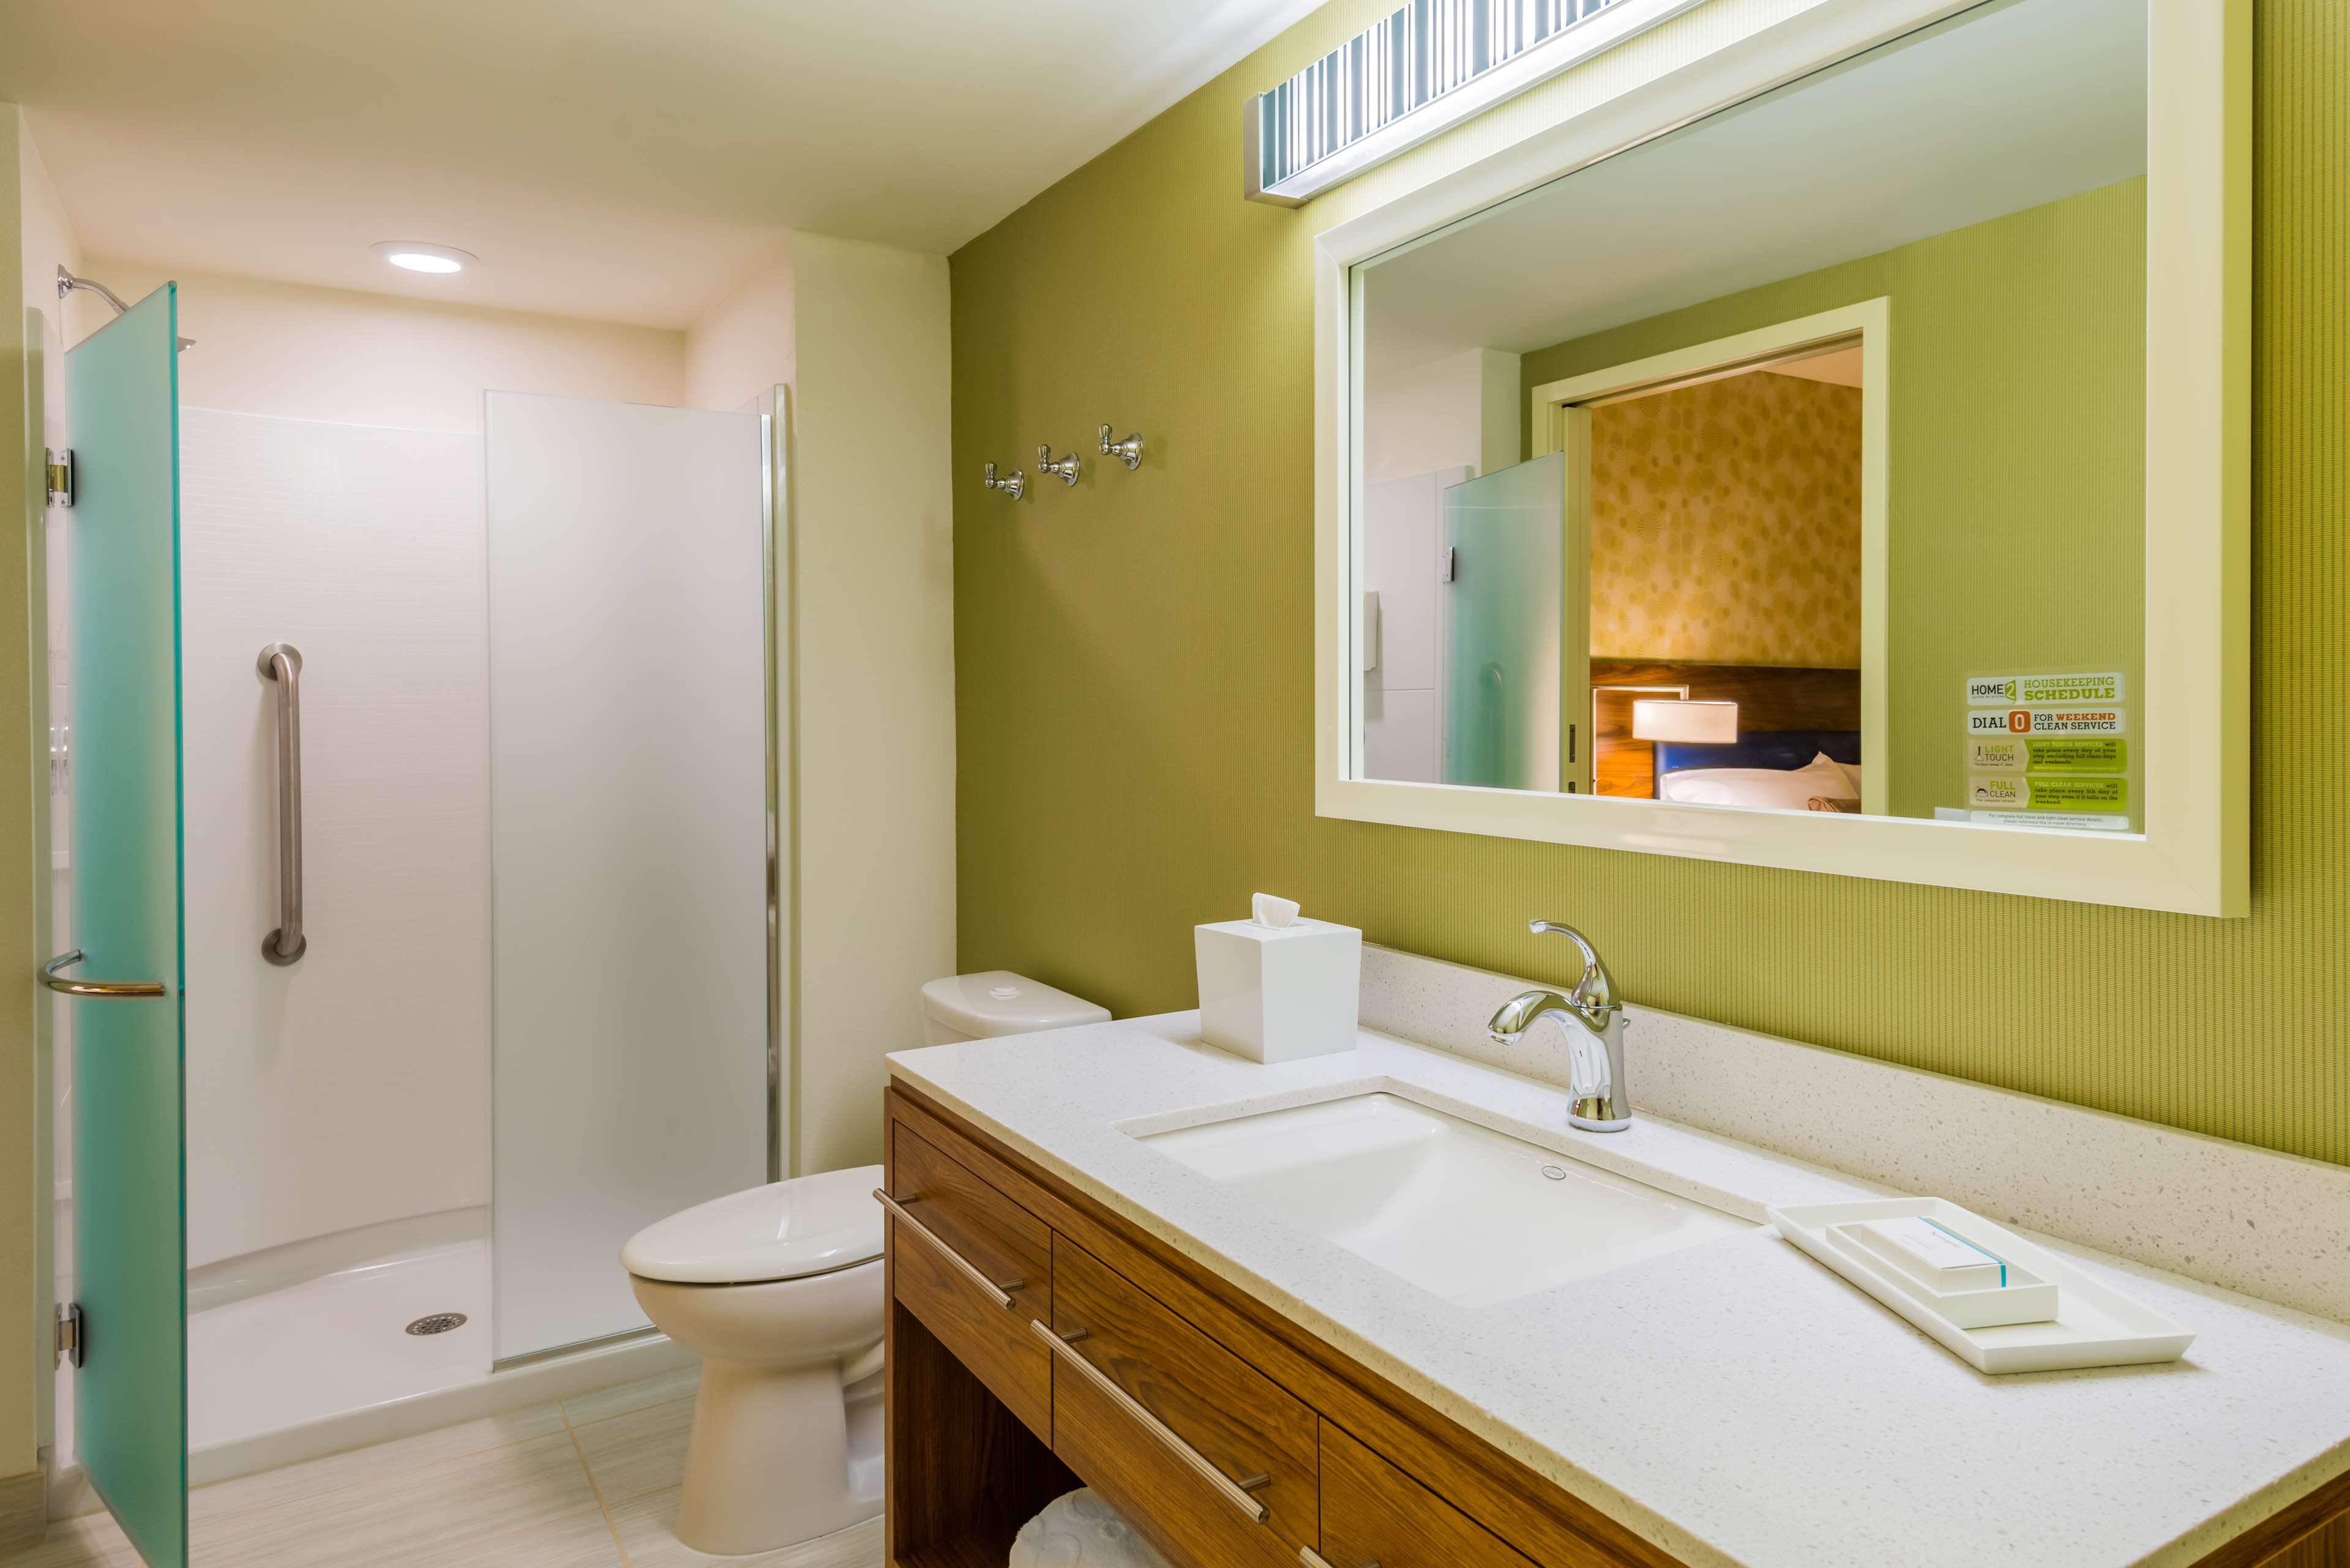 Home2 Suites by Hilton Buffalo Airport/Galleria Mall Photo